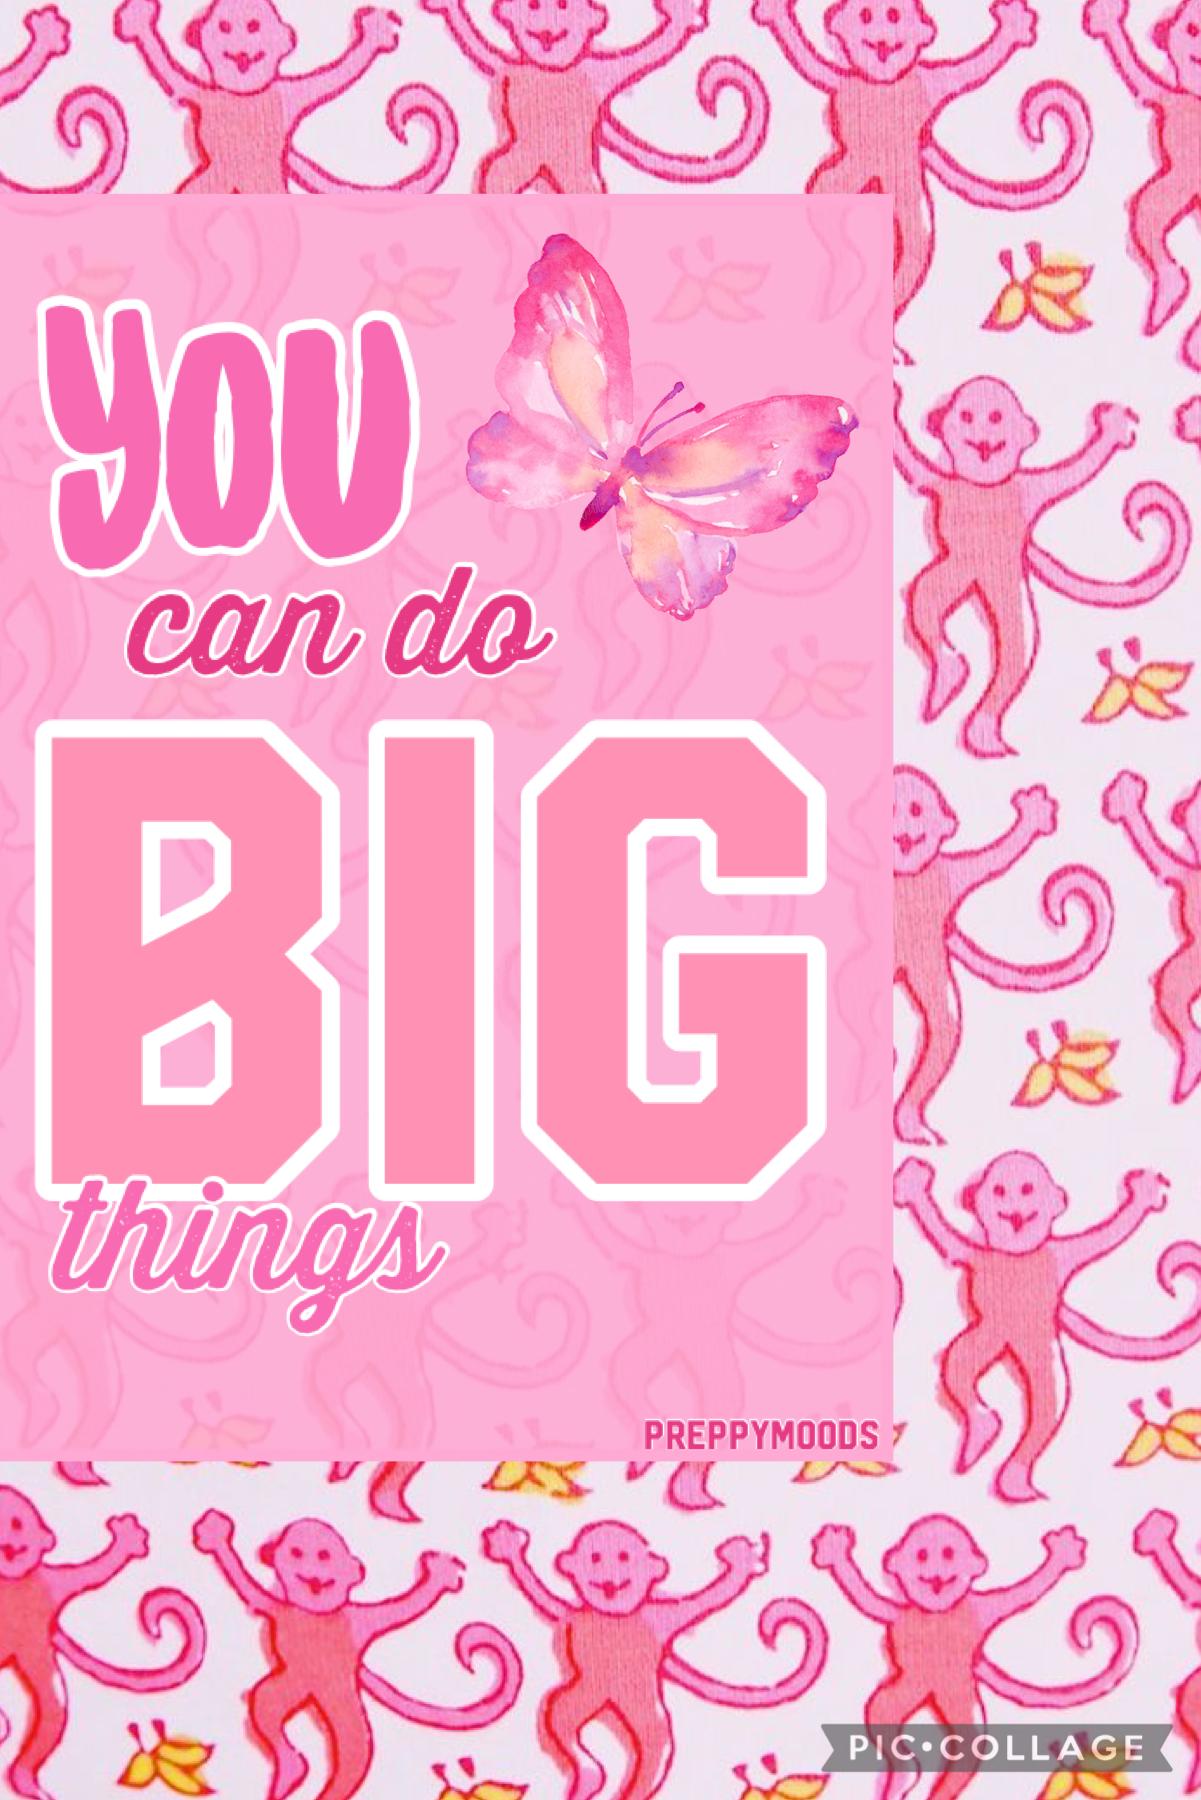 you can do big things 💘💘💘 